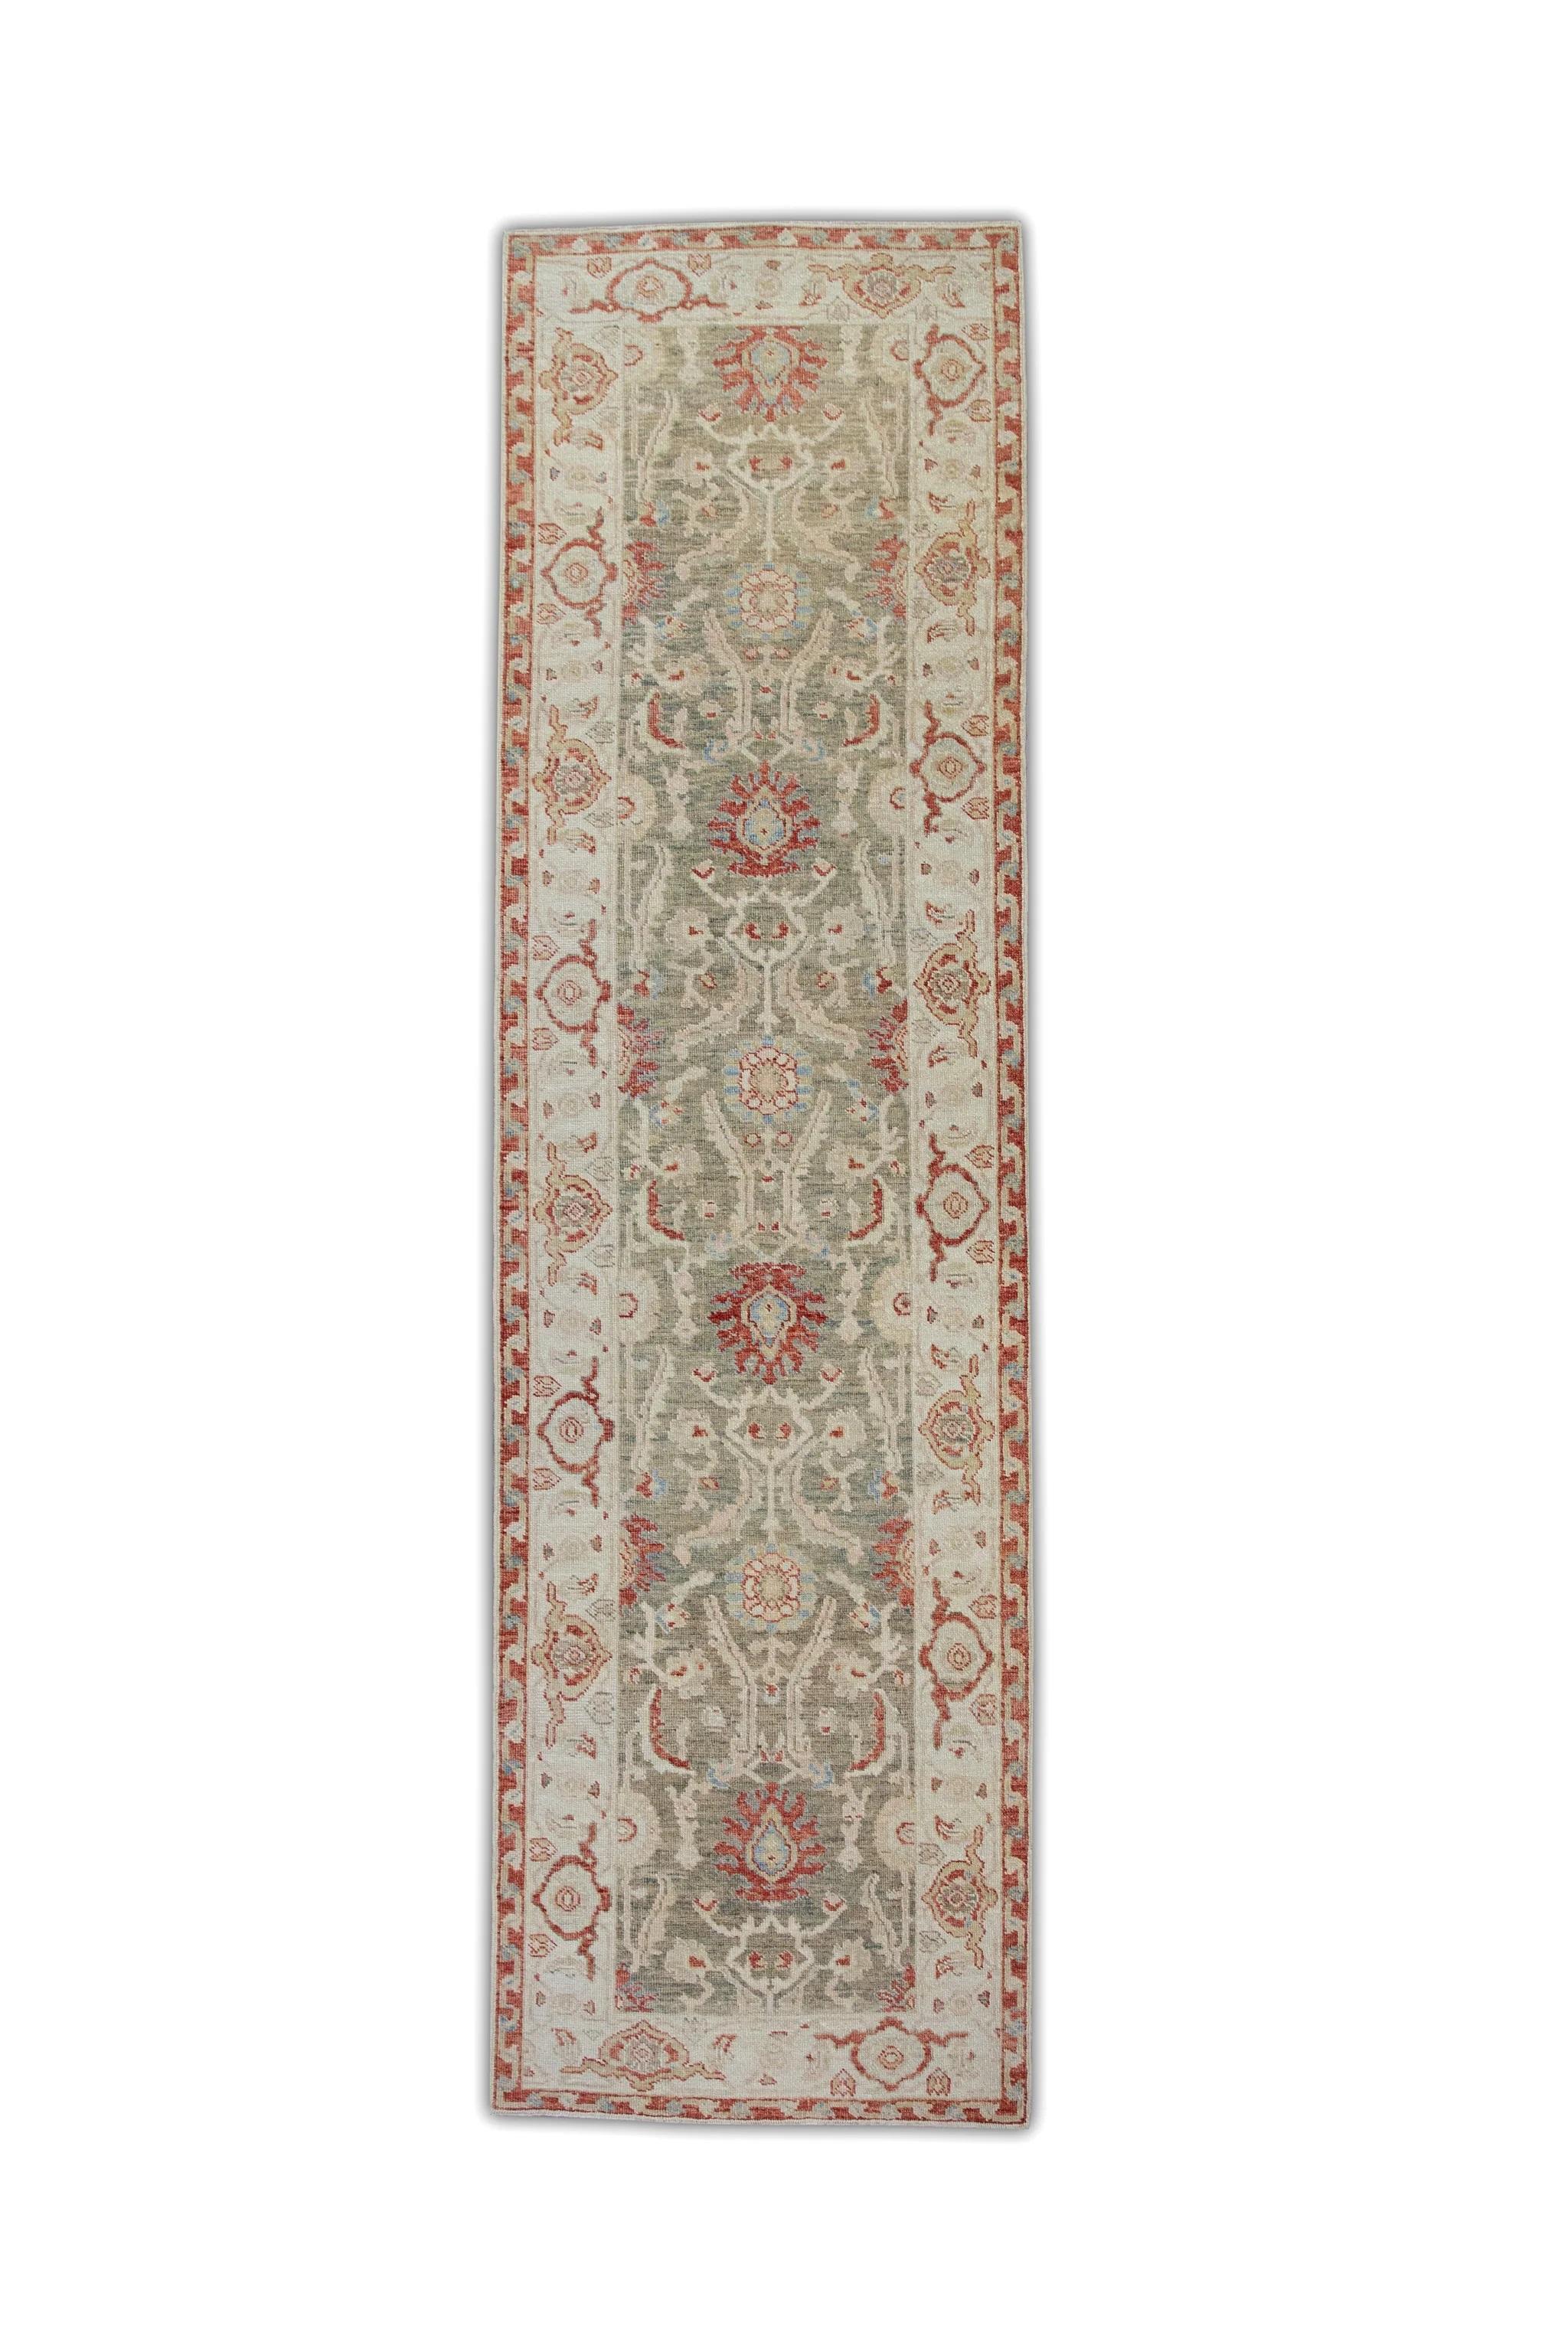 Red and Green Floral Turkish Finewoven Wool Oushak Rug 2'8